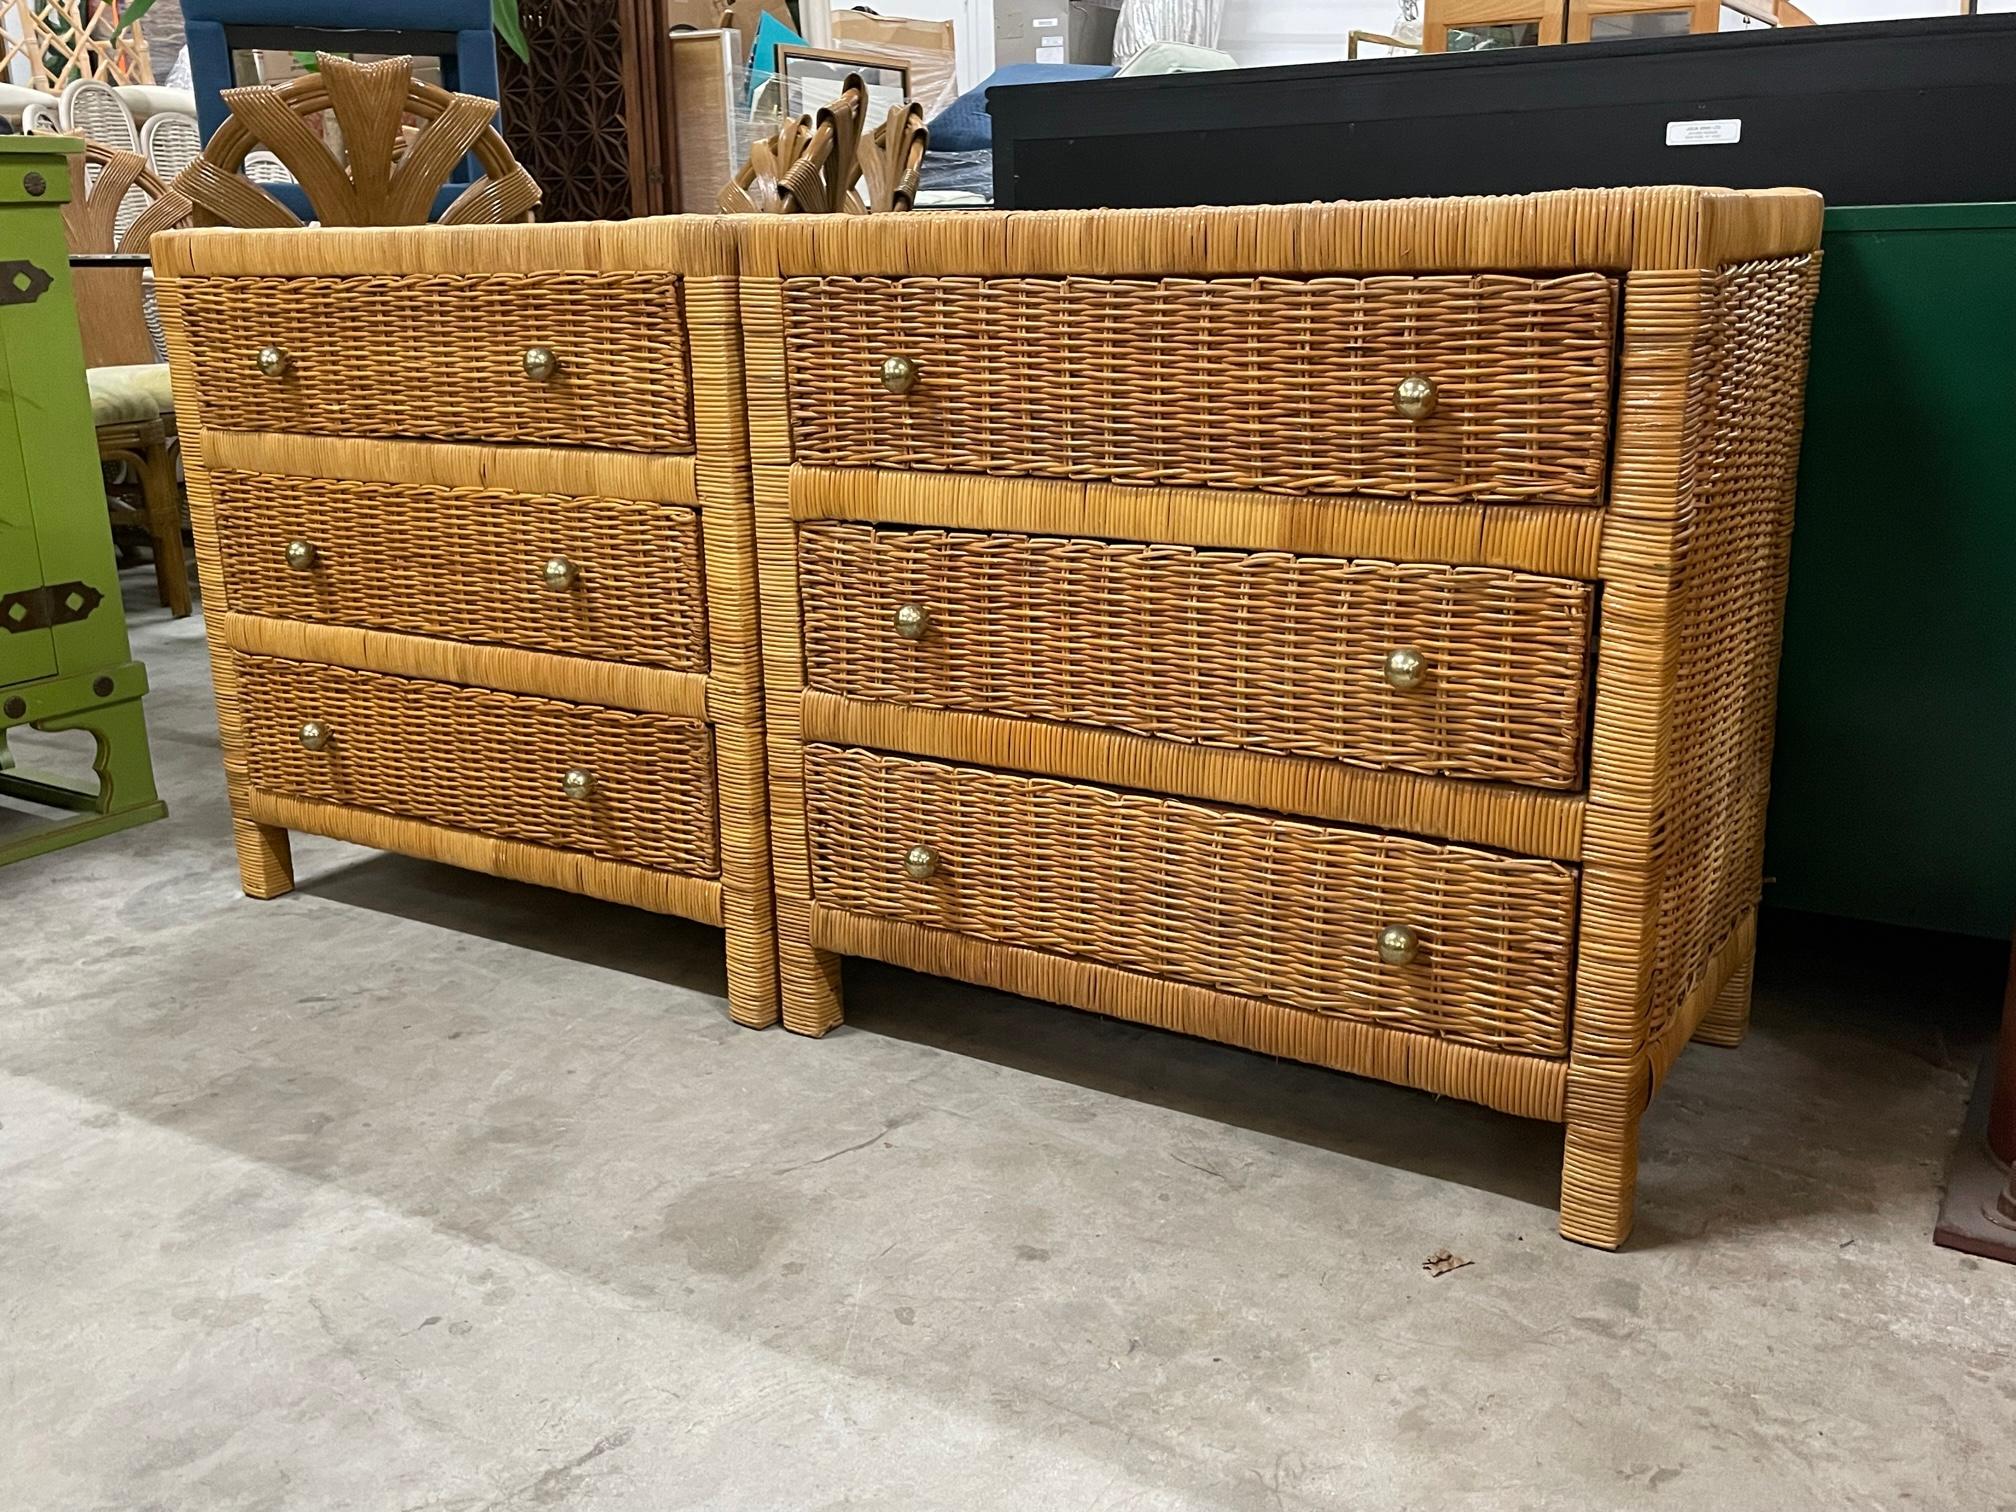 Pair of vintage triple dressers feature a full veneer of woven wicker over a wood frame and brass hardware. Could also be used as nightstands. Good vintage condition with minor imperfections consistent with age. May exhibit scuffs, marks, or wear,